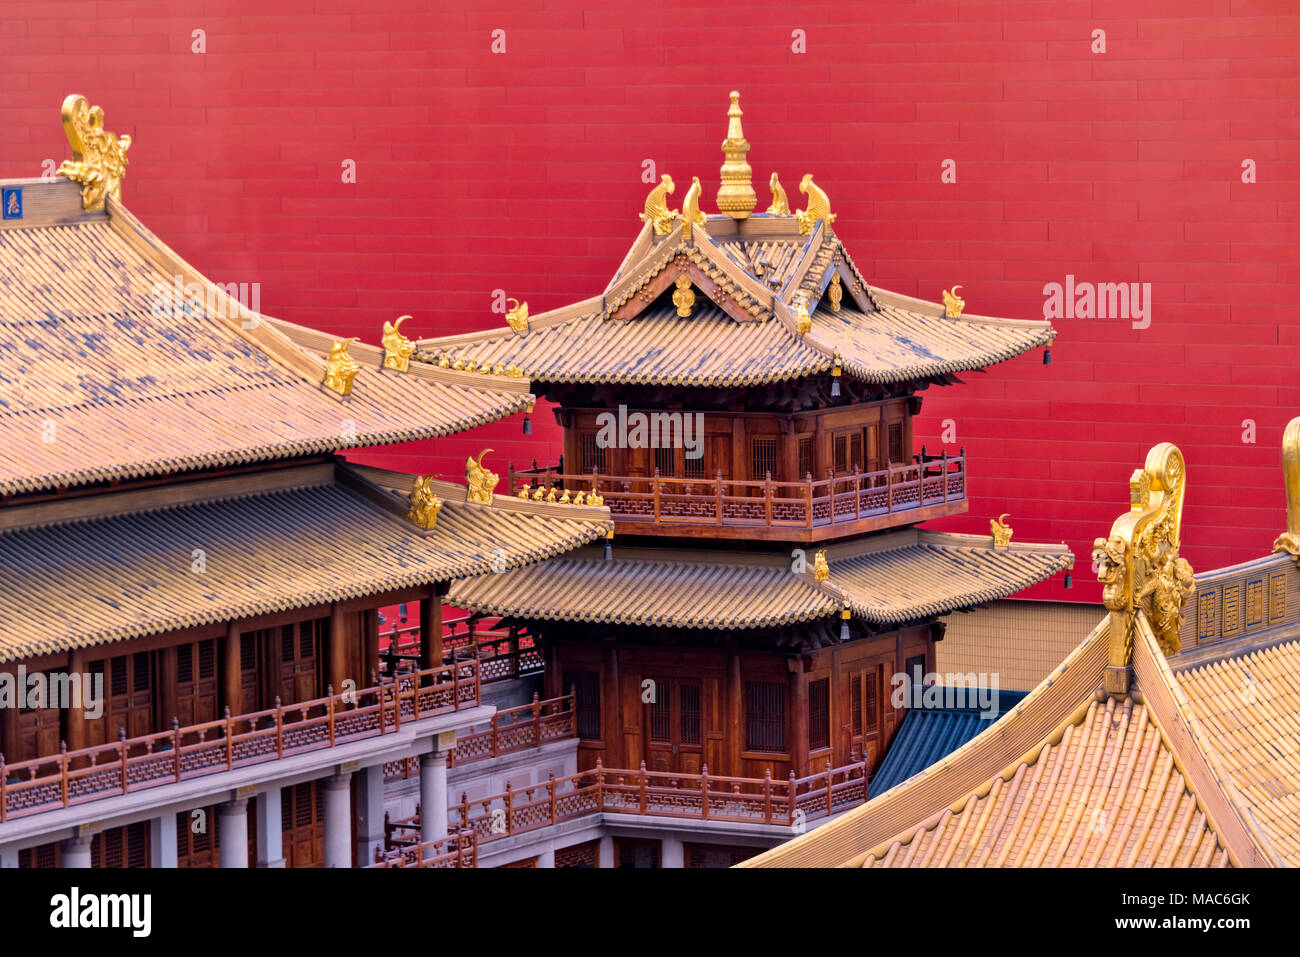 Architectural details of Jing'an Temple, Shanghai, China Stock Photo